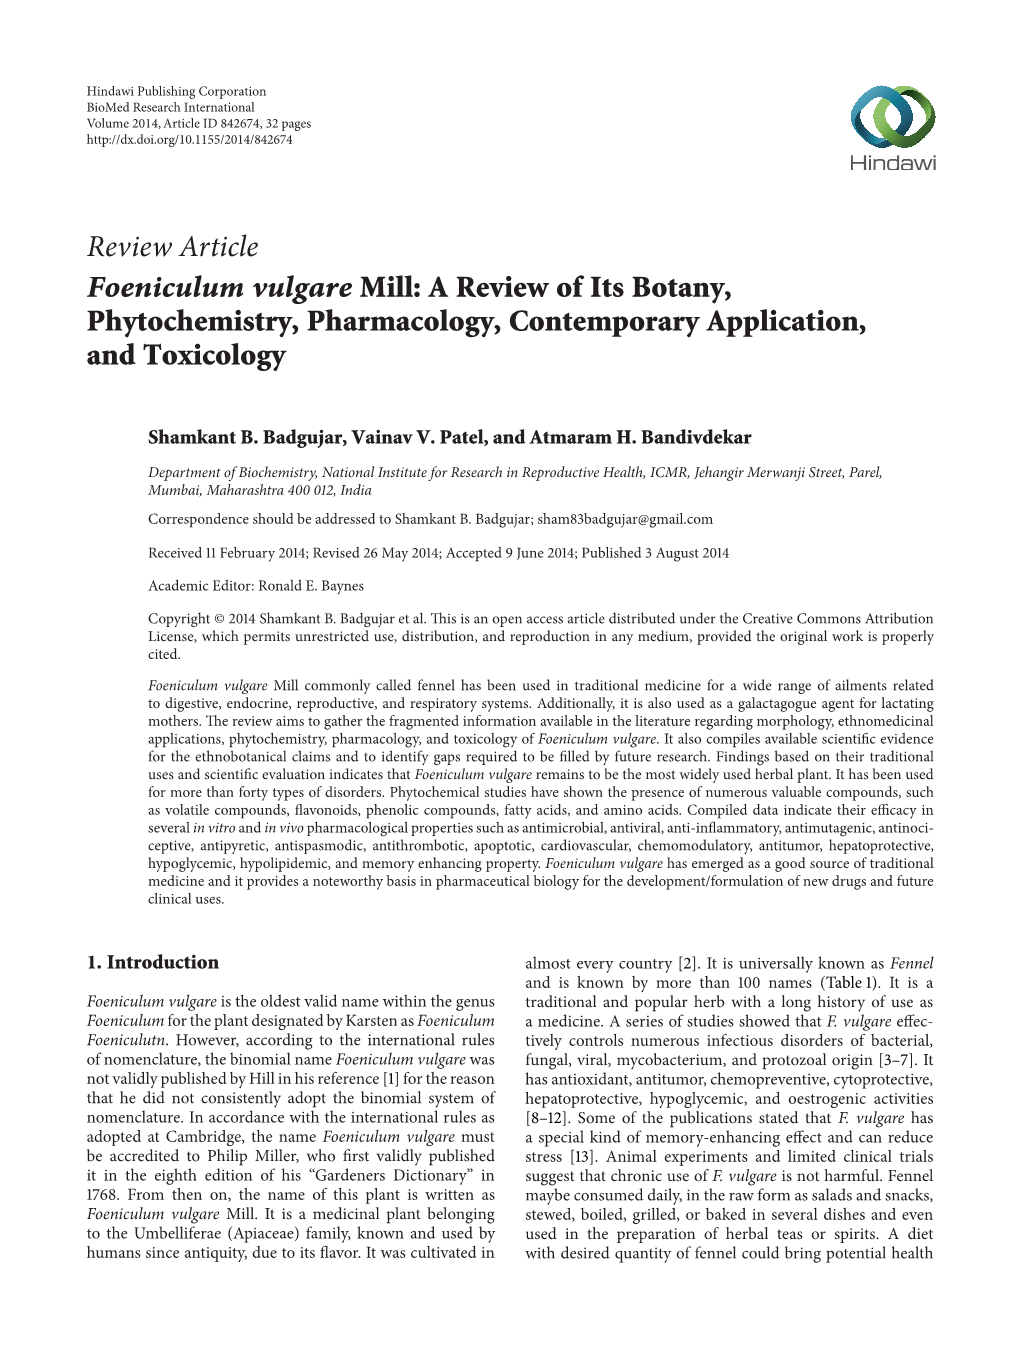 Review Article Foeniculum Vulgare Mill: a Review of Its Botany, Phytochemistry, Pharmacology, Contemporary Application, and Toxicology